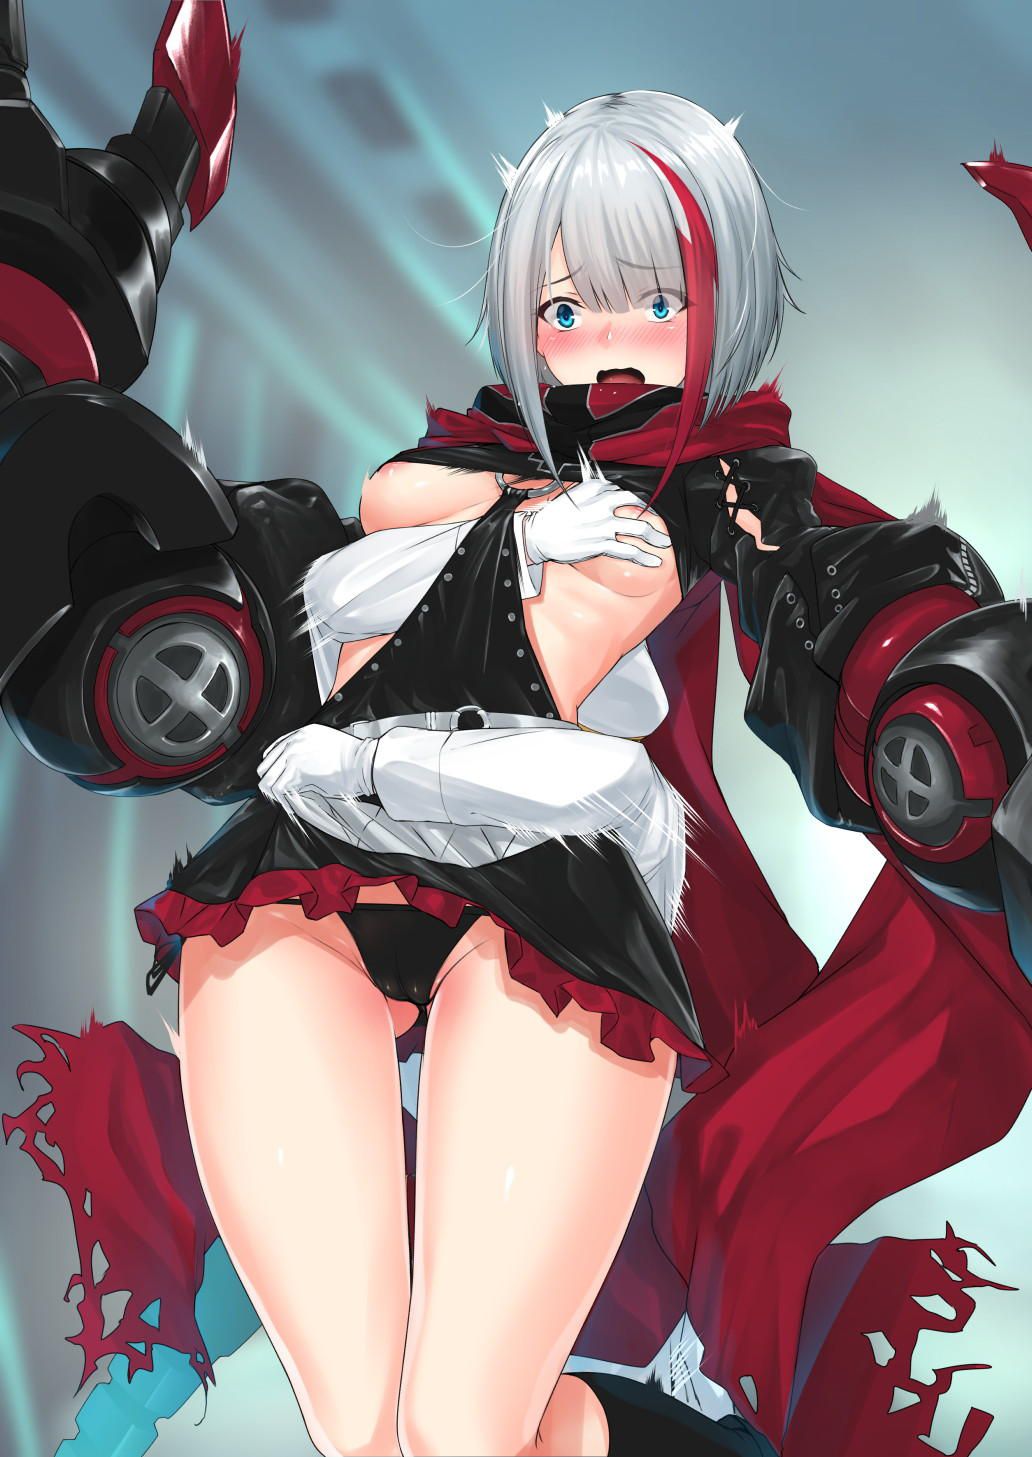 I collected the erotic images of Azur Lane. 5